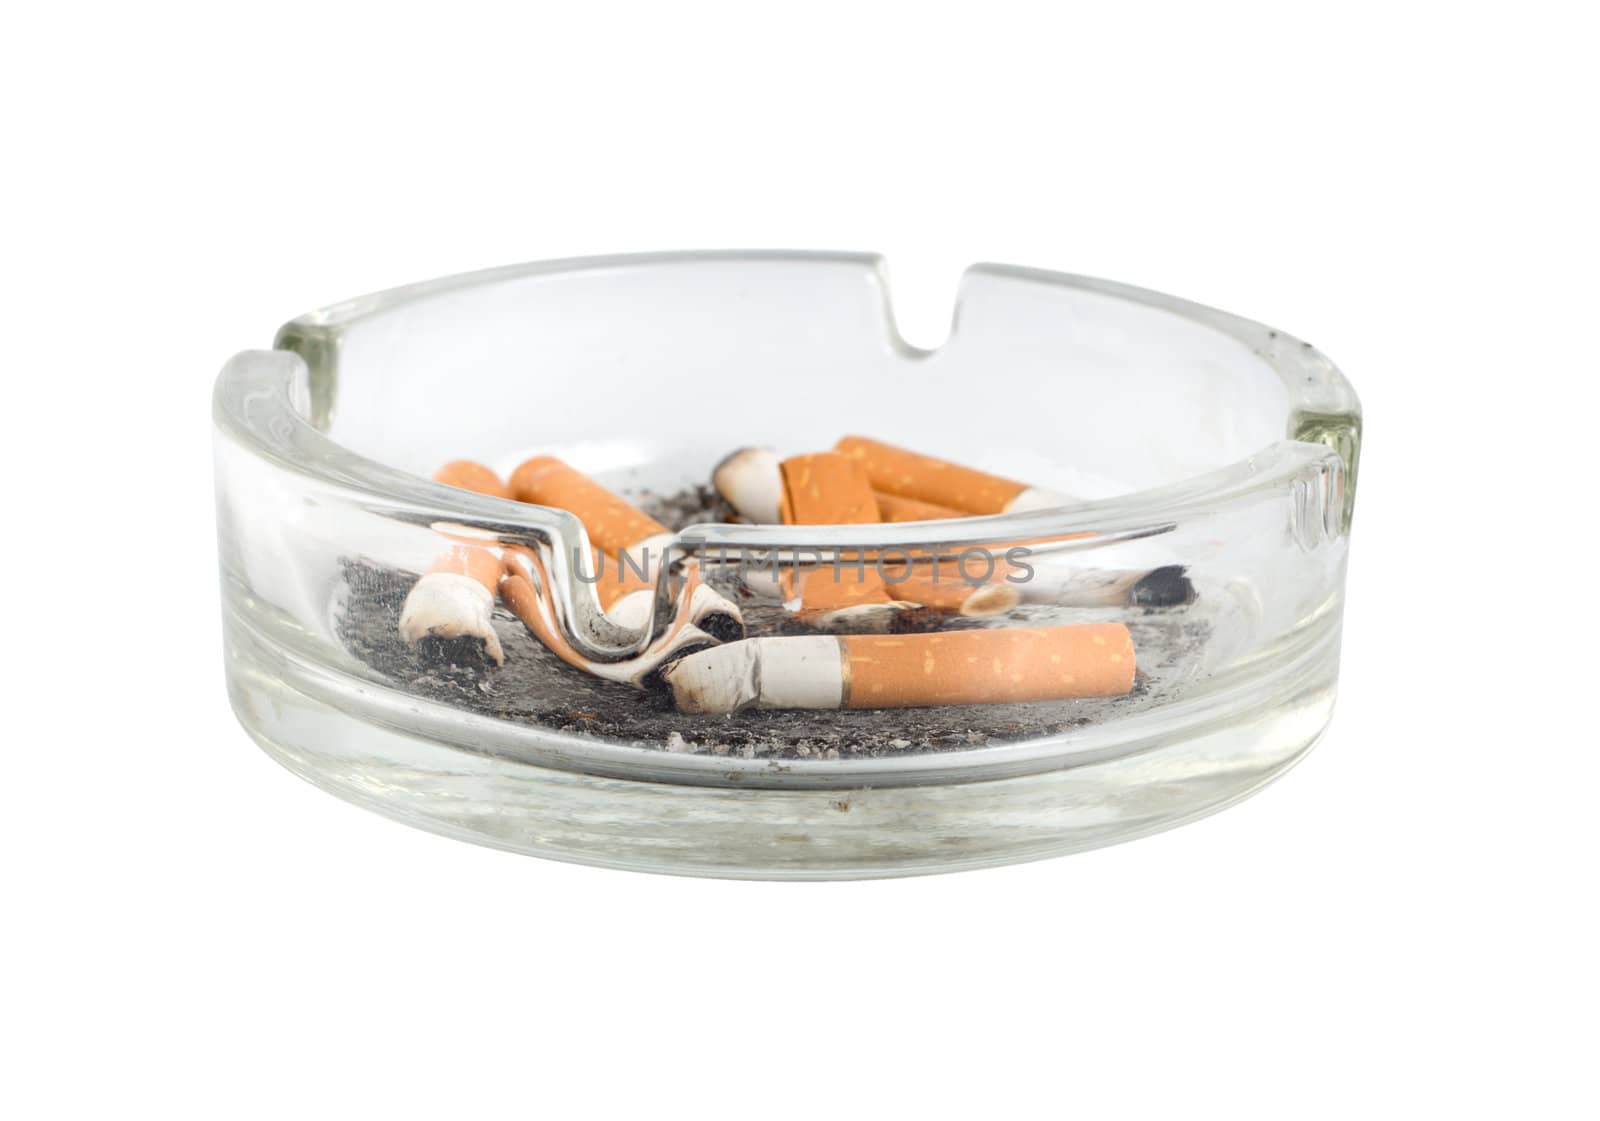 Cigarettes in an ashtray isolated on white background